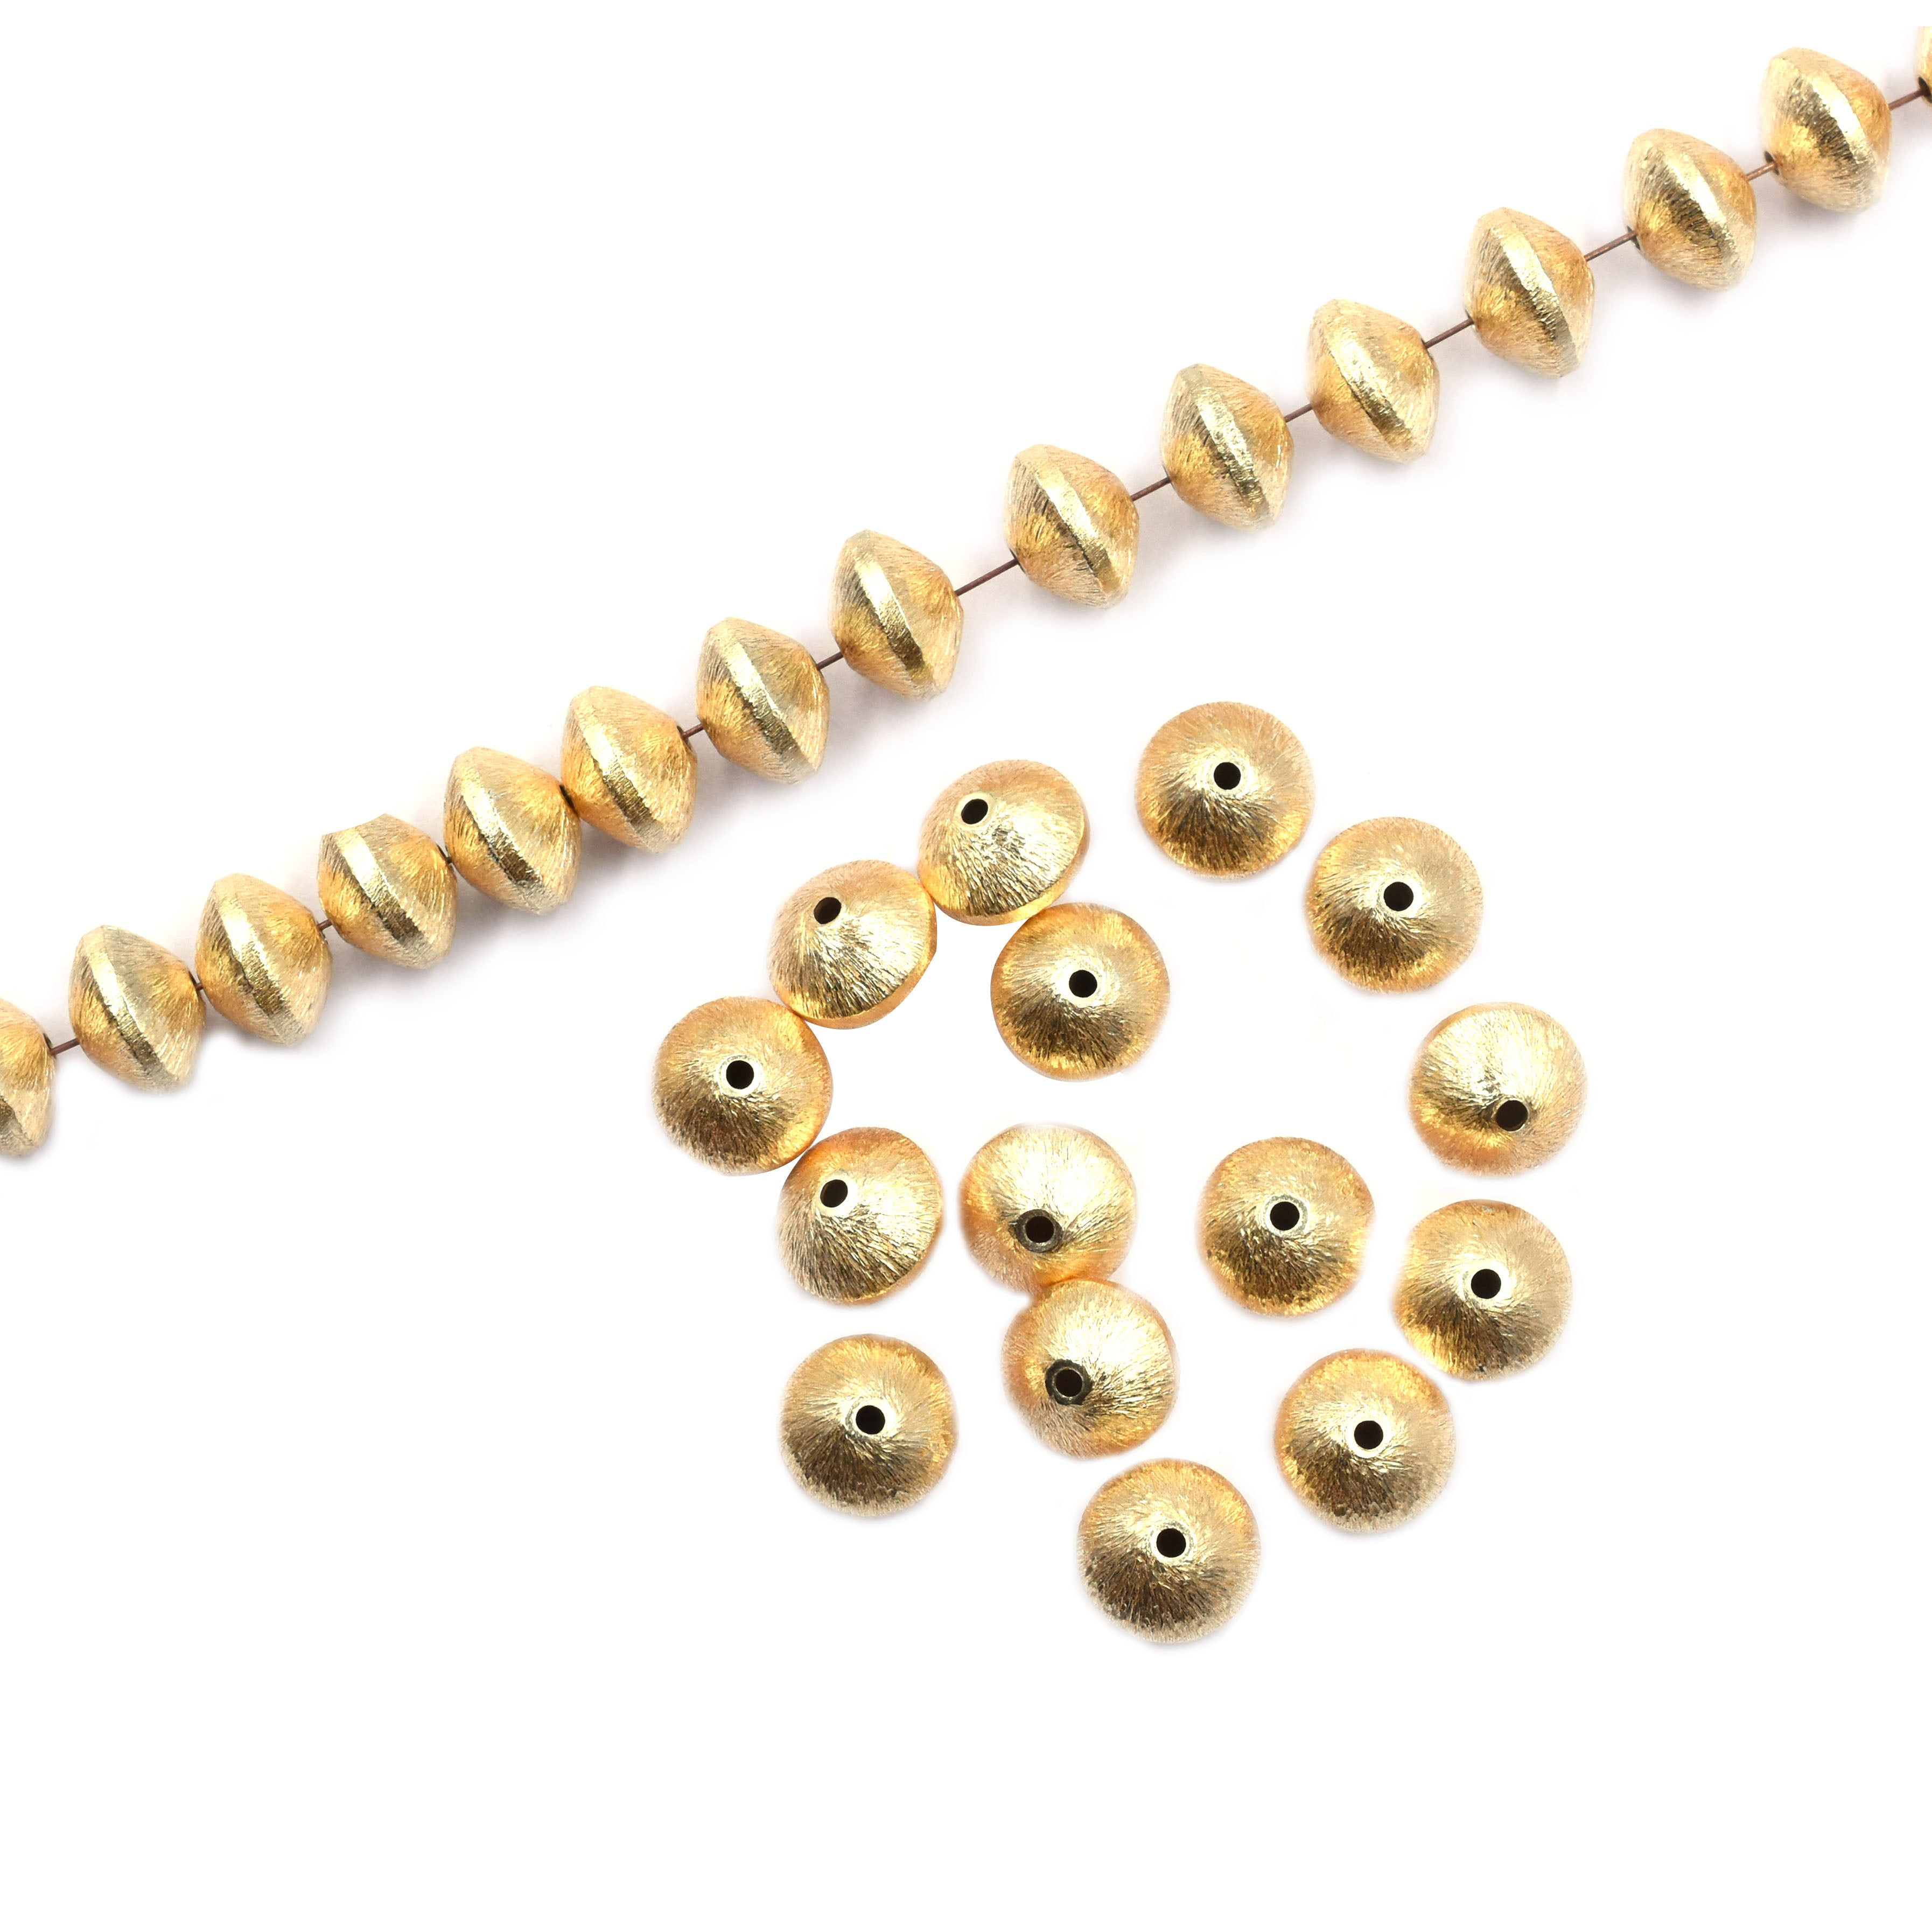 30 Pcs 10mm Bicone Brushed Matte Finish Beads Gold Plated Copper